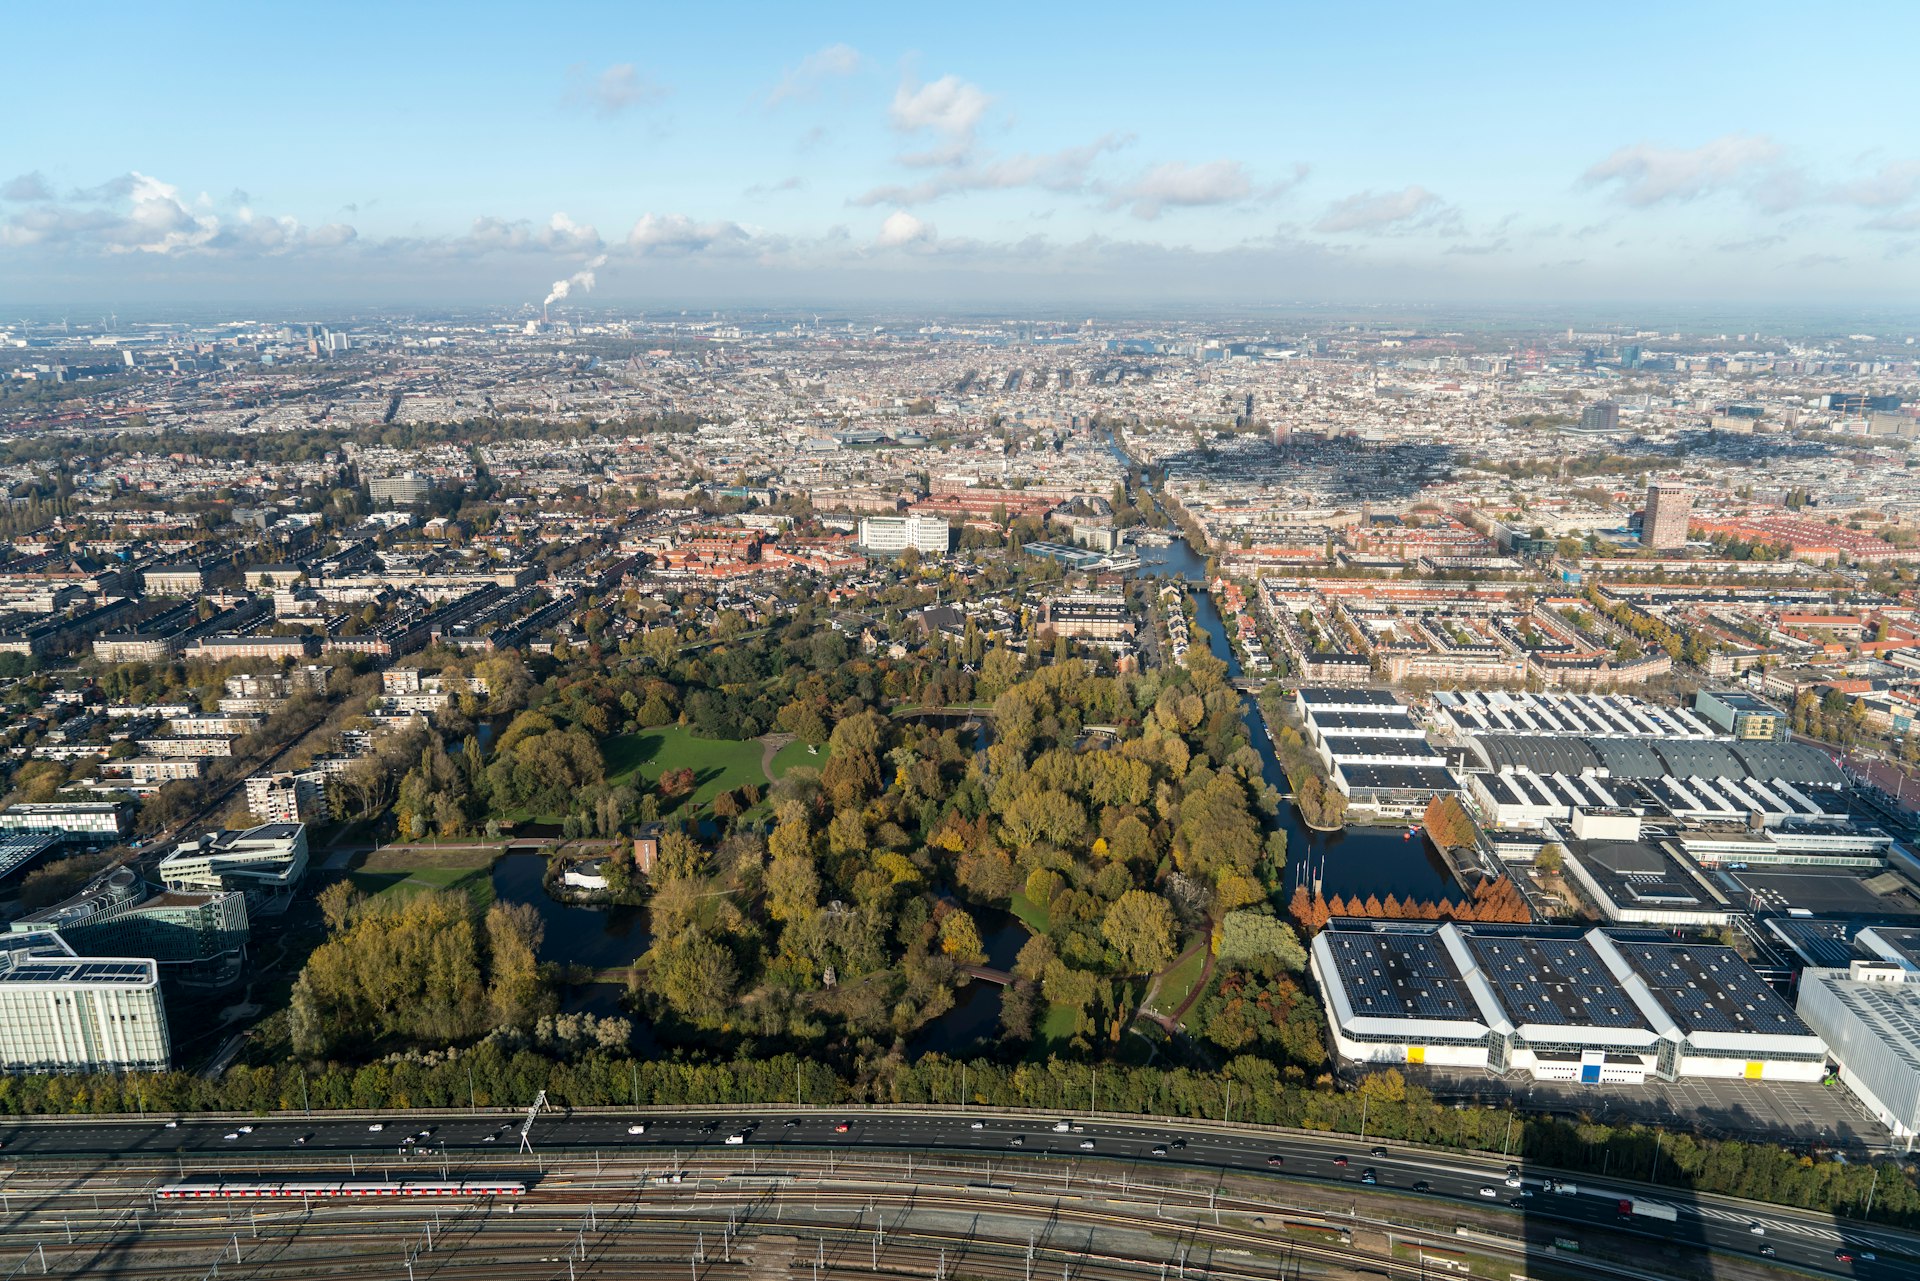 An aerial shot of a large wooded area surrounded by buildings